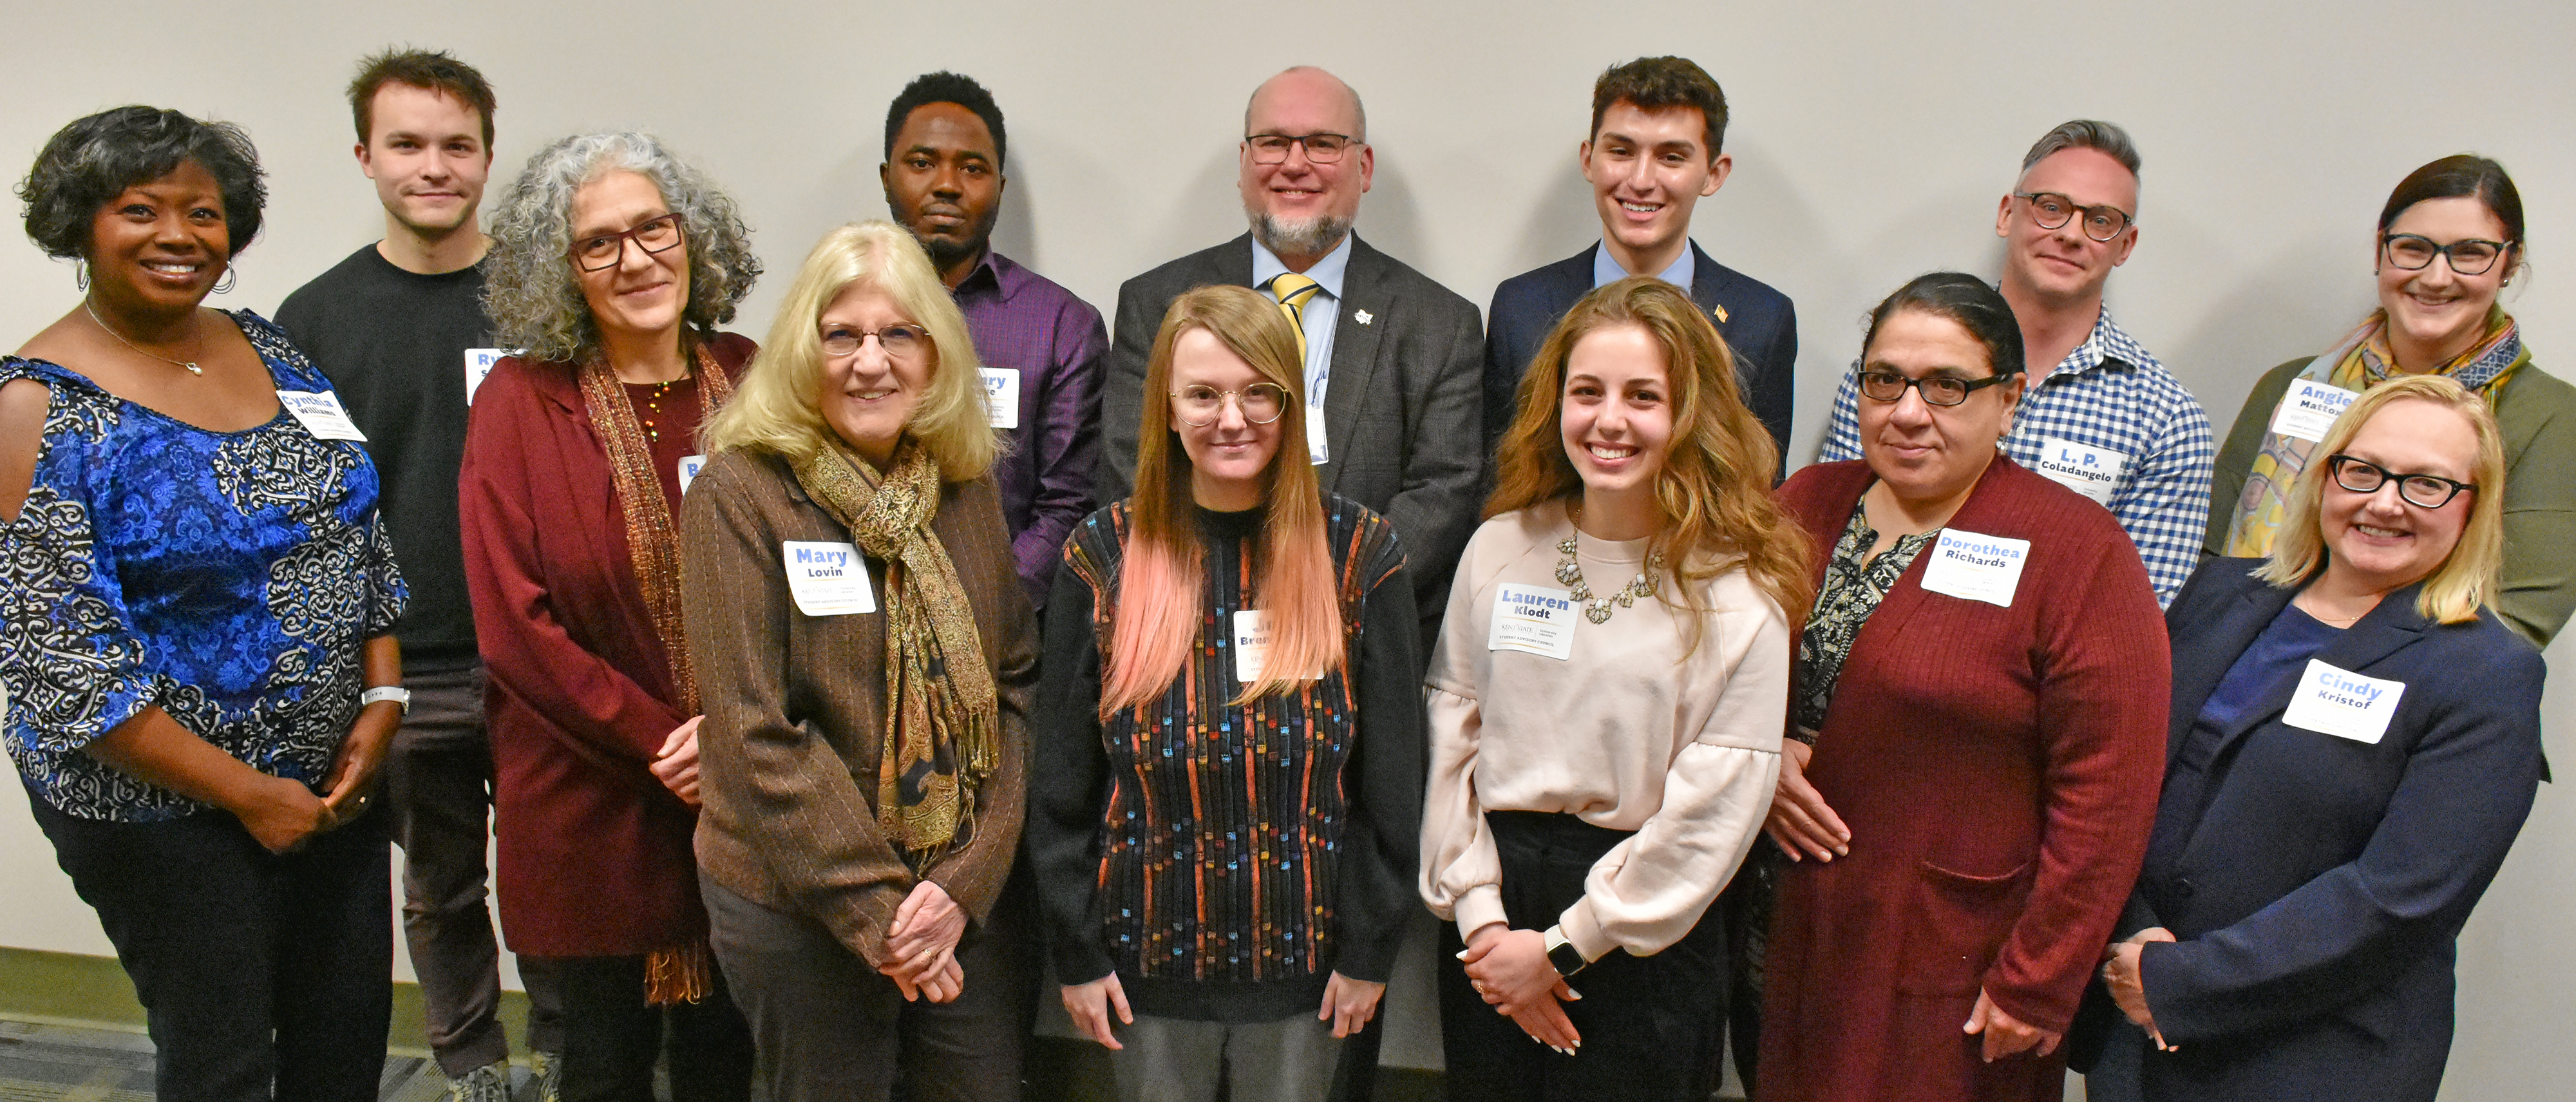 Group photo showing members of the Kent State University Libraries Student Advisory Council